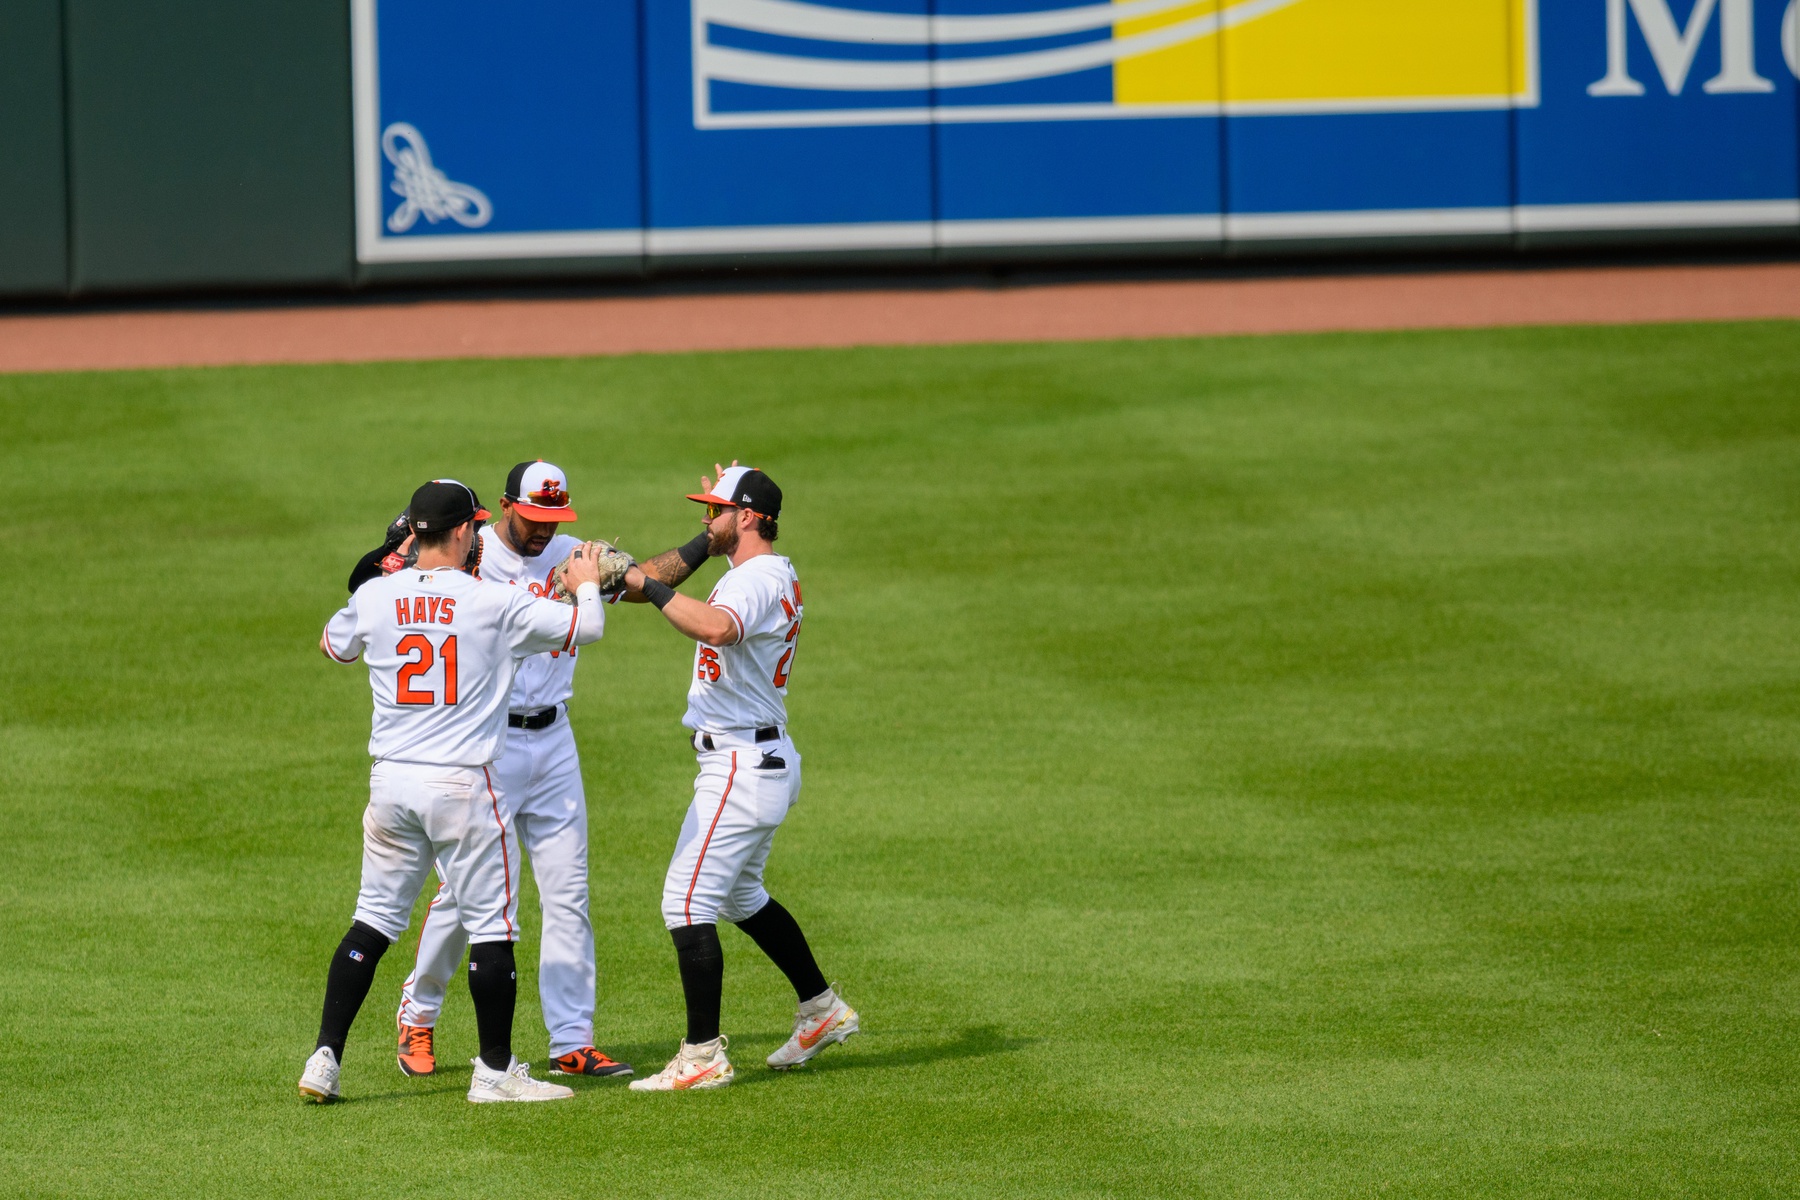 If the Orioles Were Serious About Competing, How Good Could They